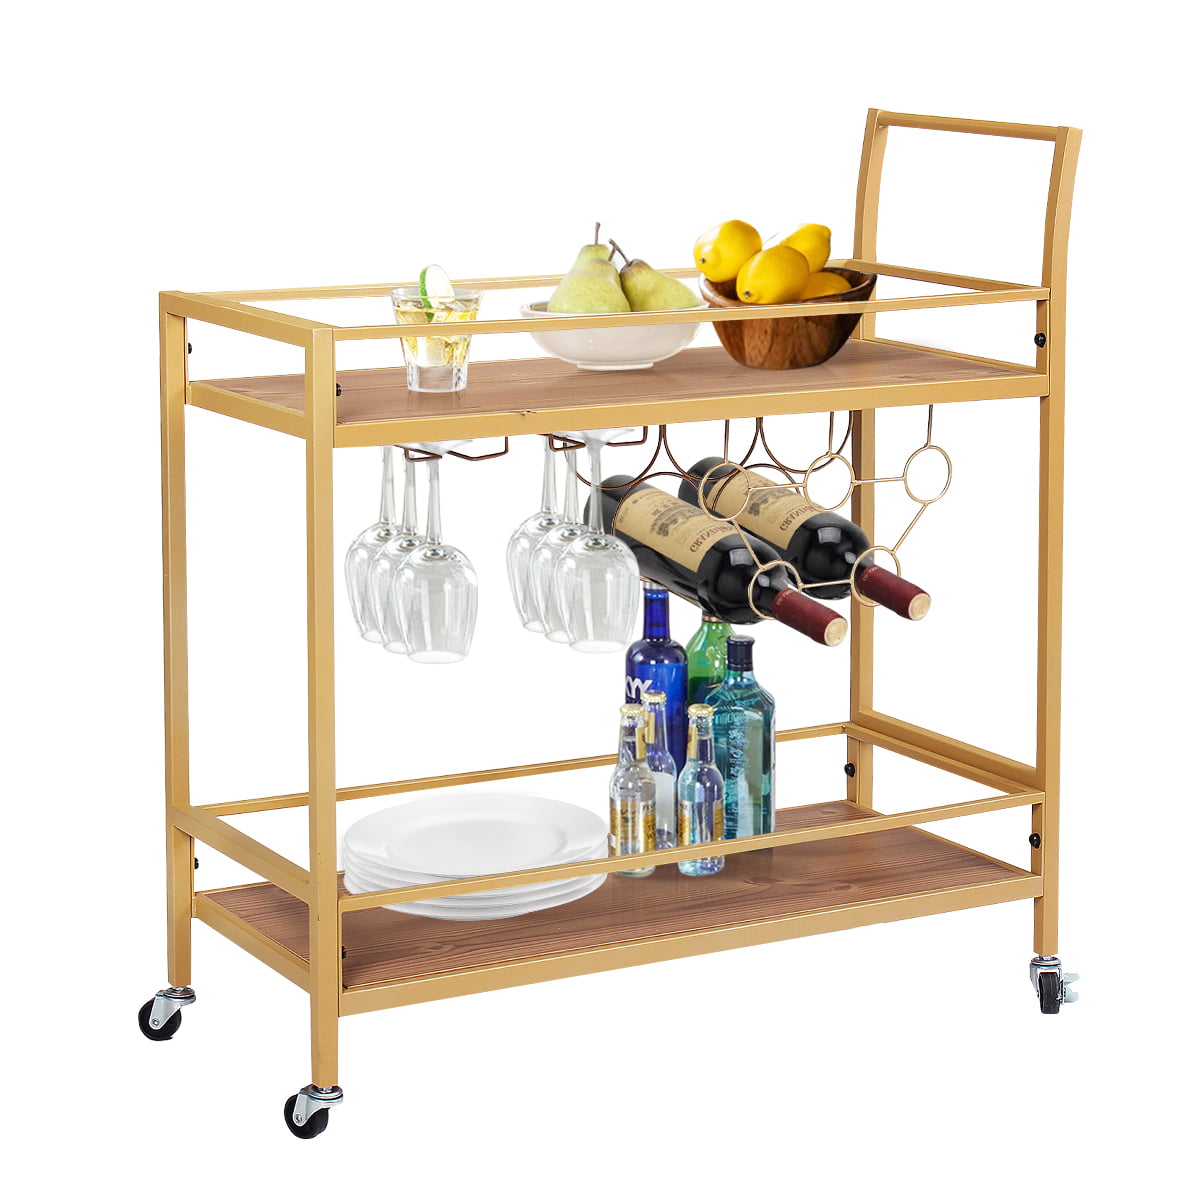 Easy Assembly Rustic Brown BF02TC01 3-Tier Utility Cart with Lockable Castors Kitchen Stand with Storage Shelves Adjustable Feet HOOBRO Bar Cart Rolling Serving Cart with Wine Glasses Hooks